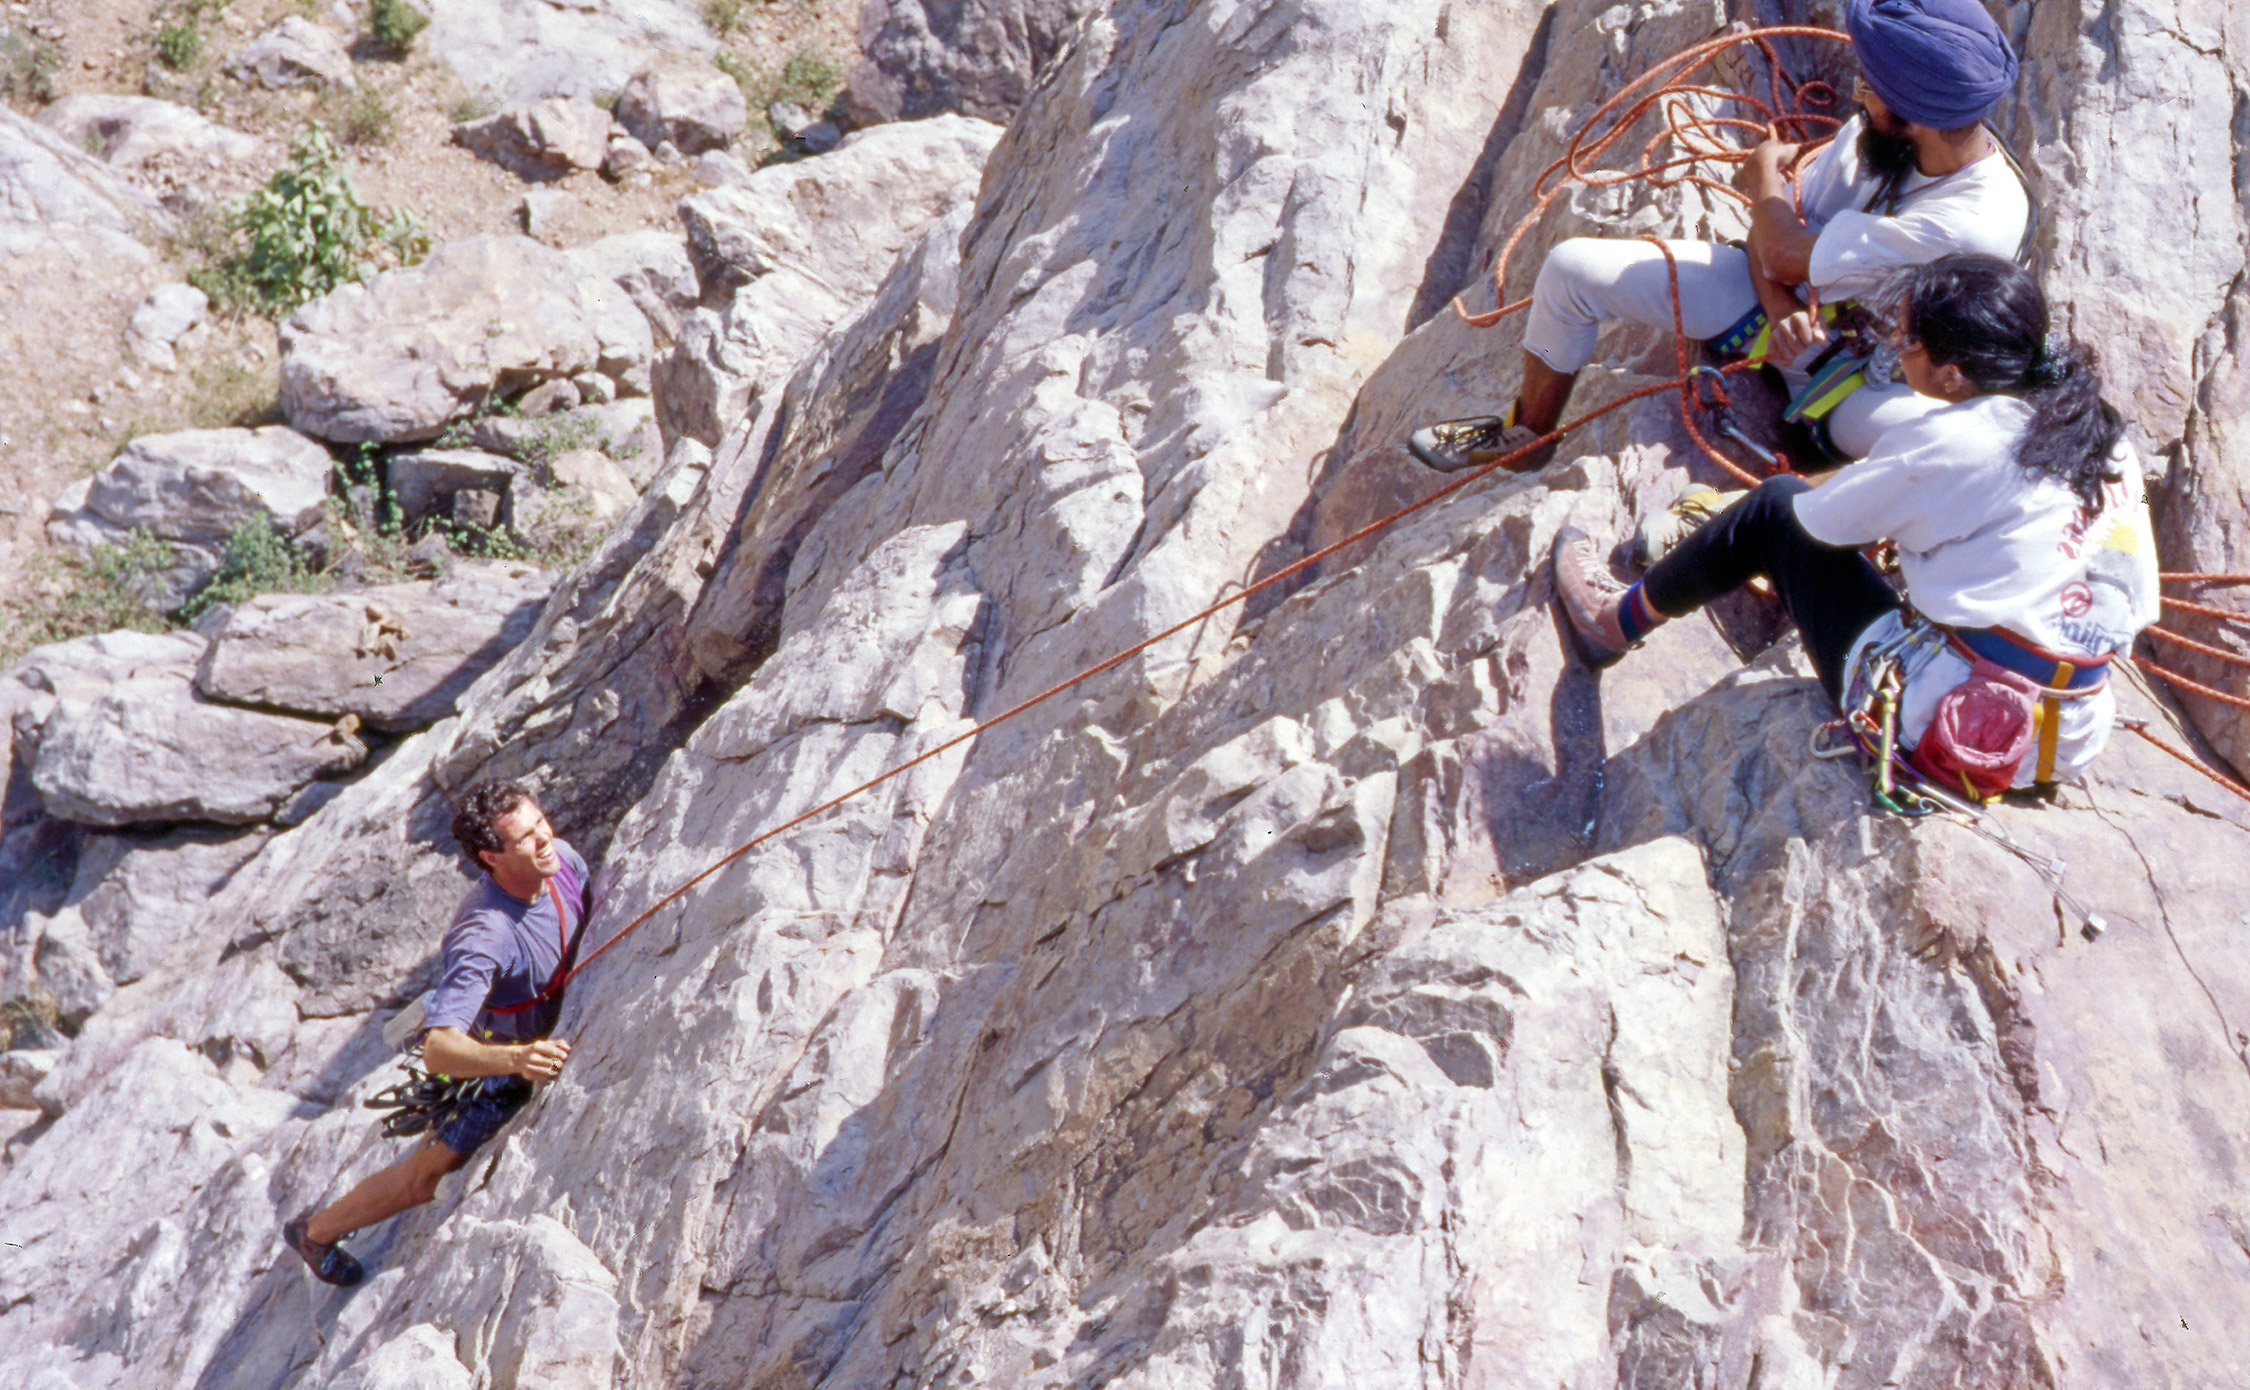 Alka and Paramjeet were part of developing Dhauj as one of main trad climbing crags near Delhi in 1990s (photo Derek Stordahl)